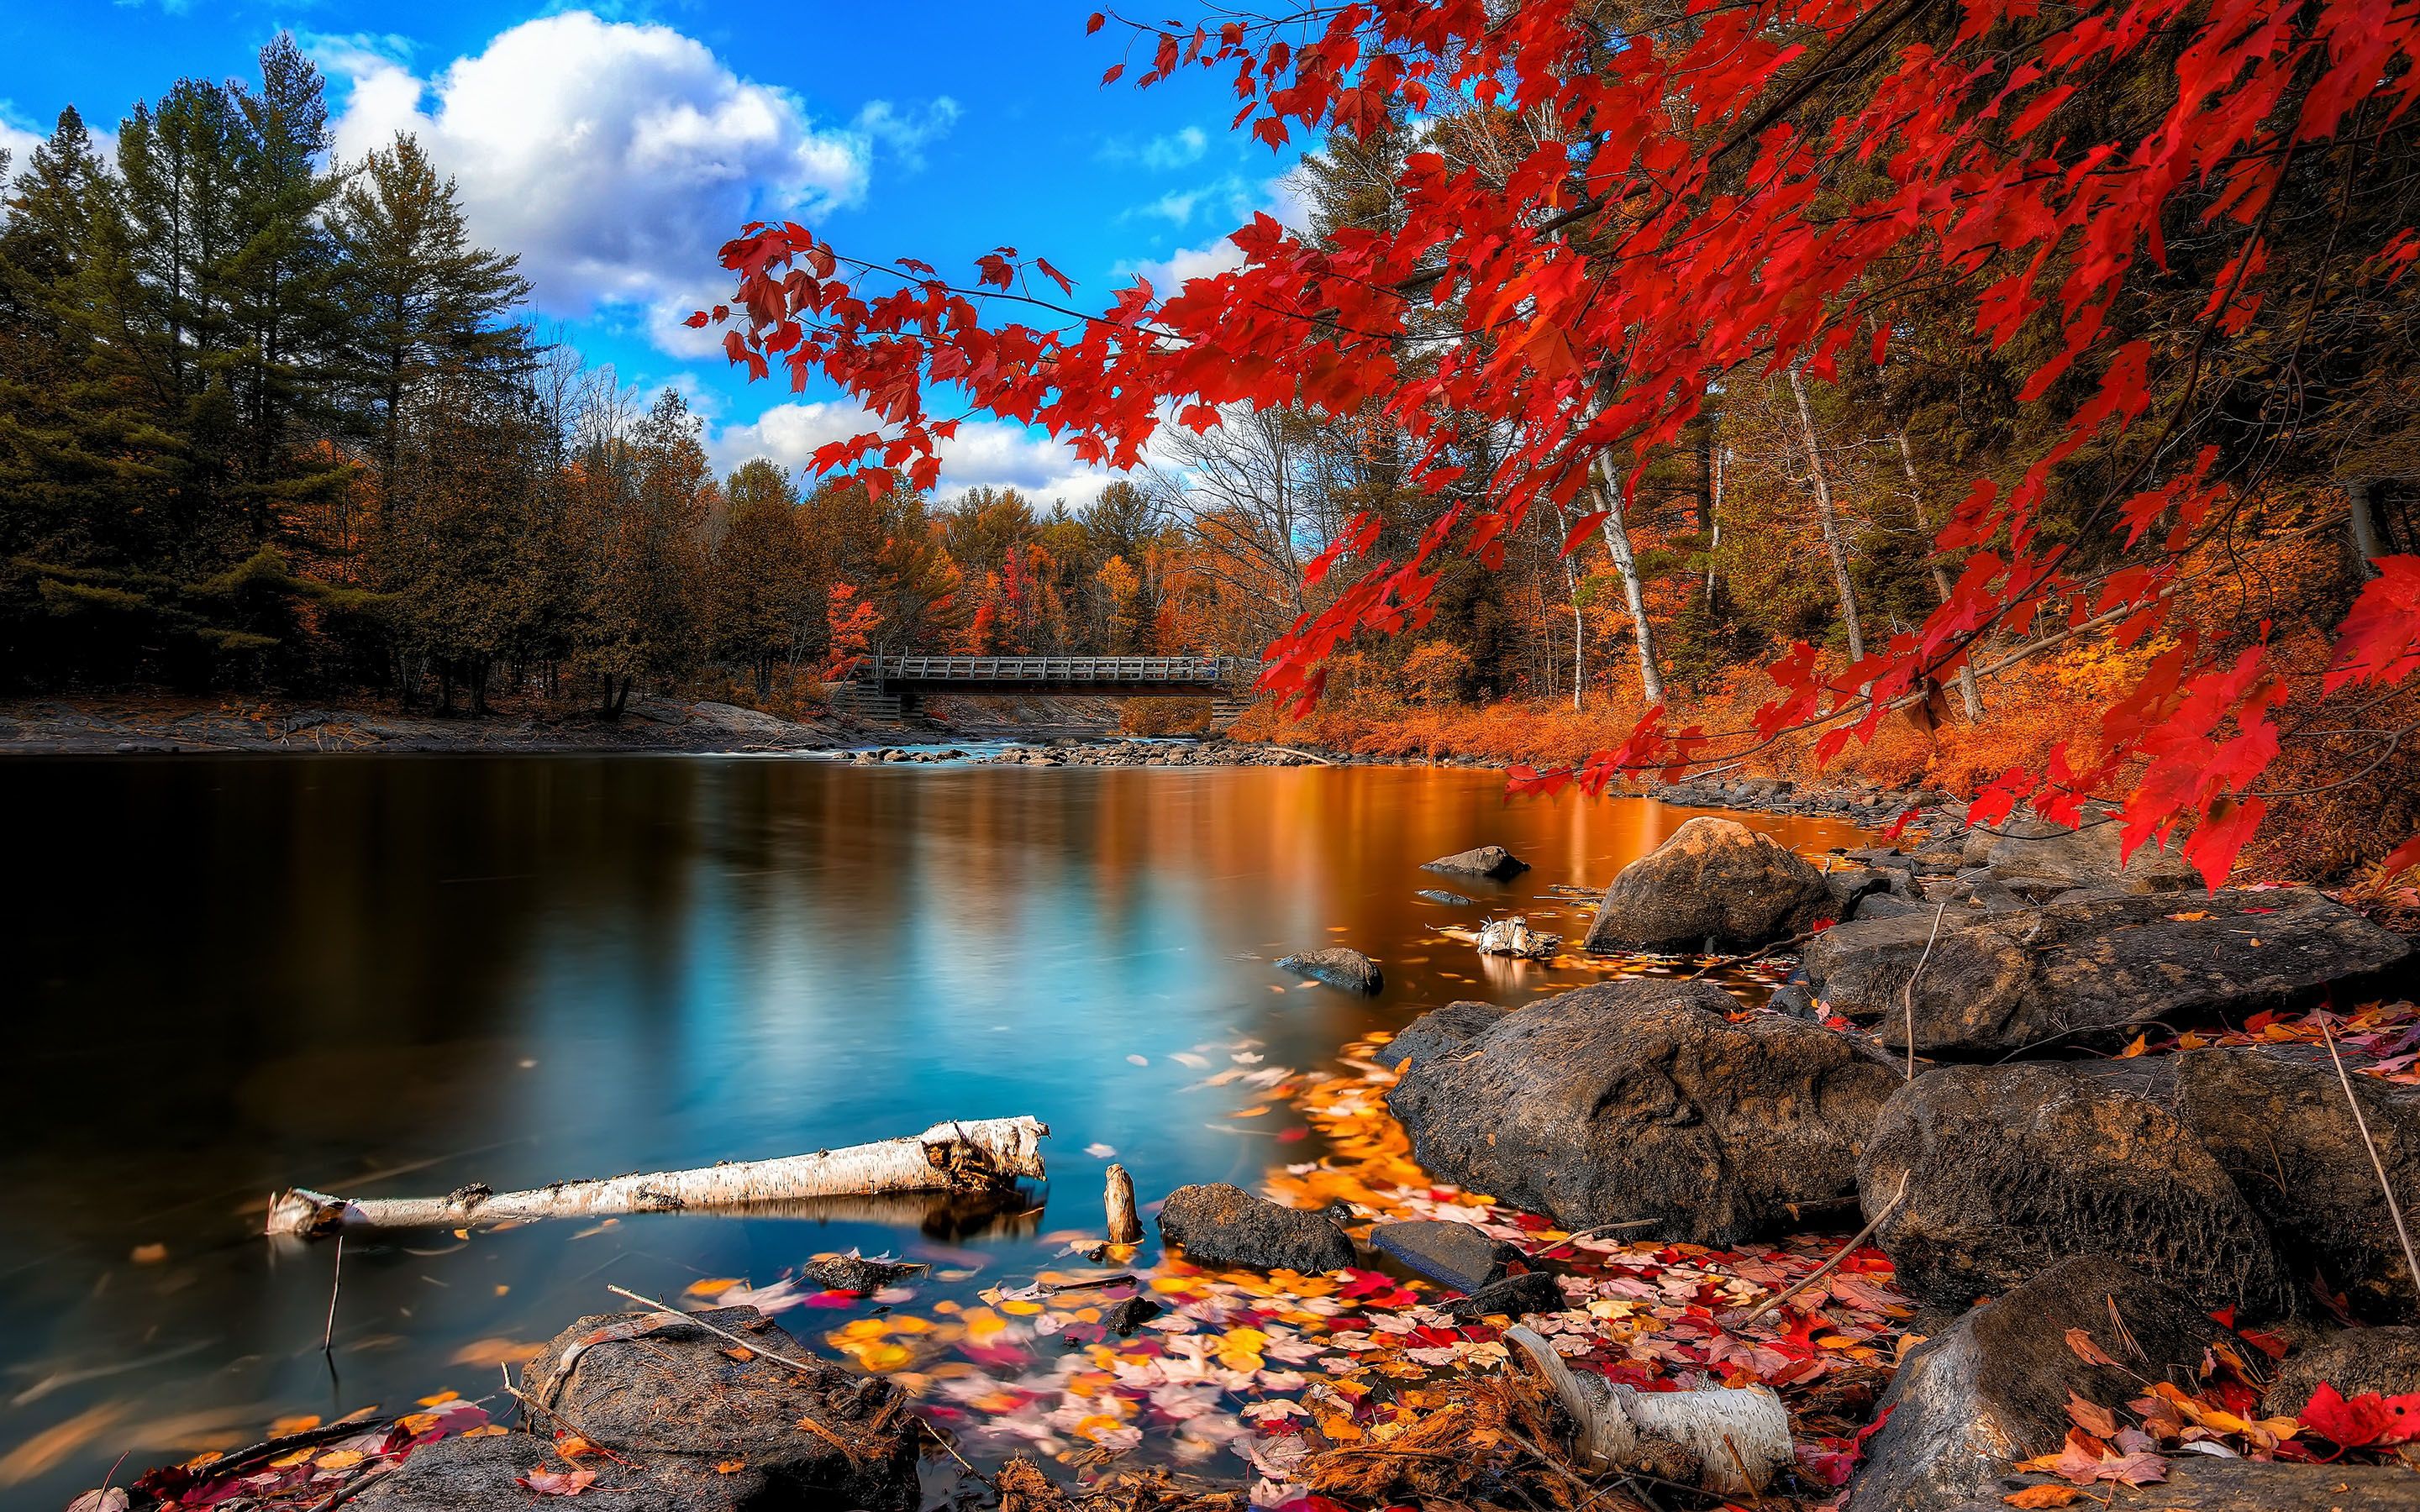 Apple MacBook Pro Wallpaper with Nature Autumn Forest and River Picture Wallpaper. Wallpaper Download. High Resolution Wallpaper